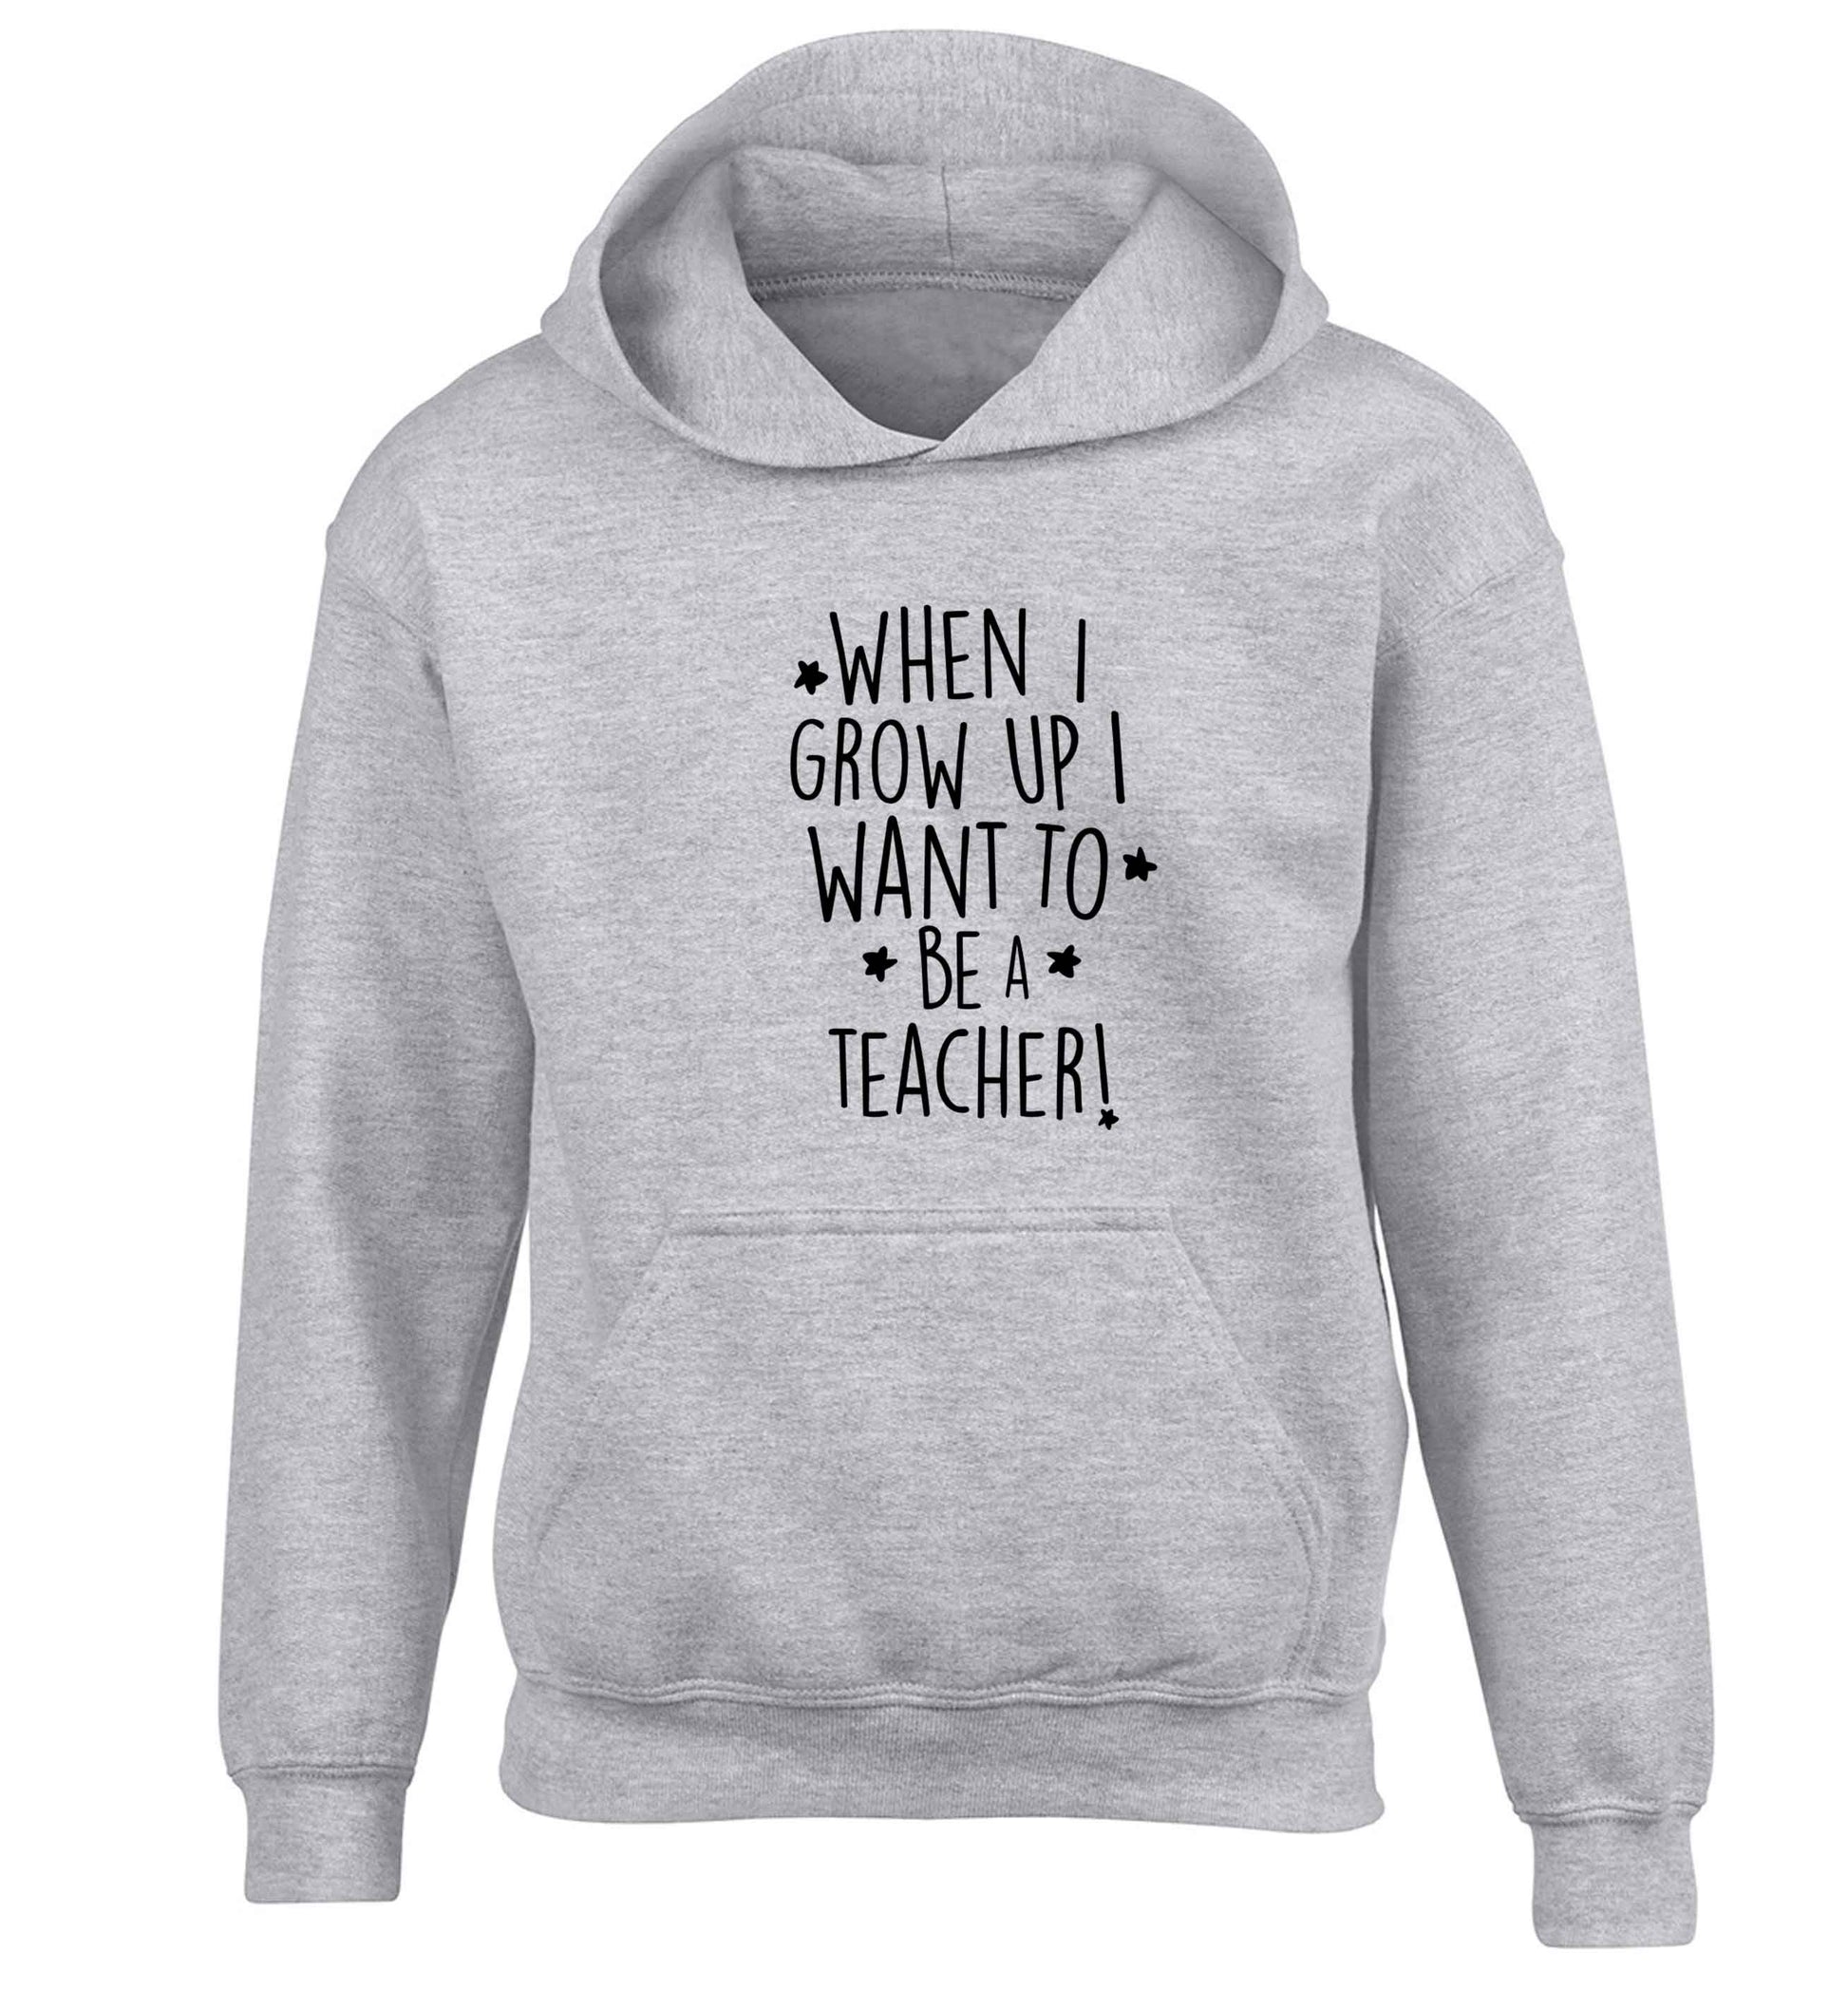 When I grow up I want to be a teacher children's grey hoodie 12-13 Years